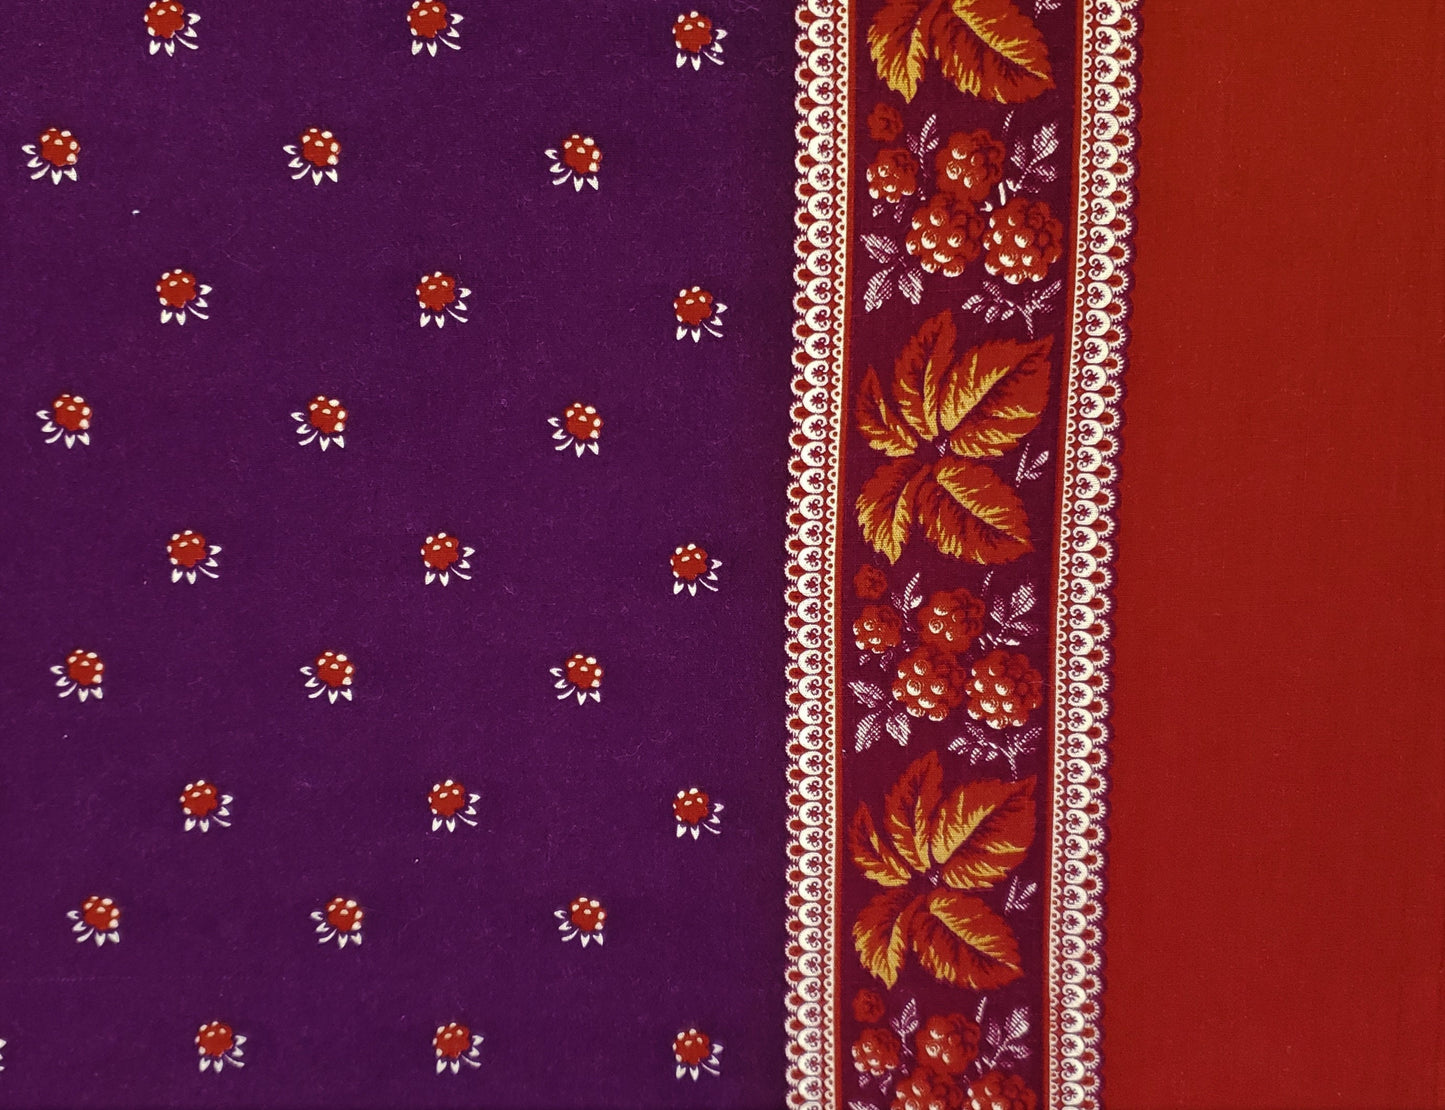 Autumn Single Border Fabric-Appr 3" Wide Rust Border on One Selvage/2-1/2" Rust and Plum Leaf & Berry Stripe/Scattered Berries on Dark Plum